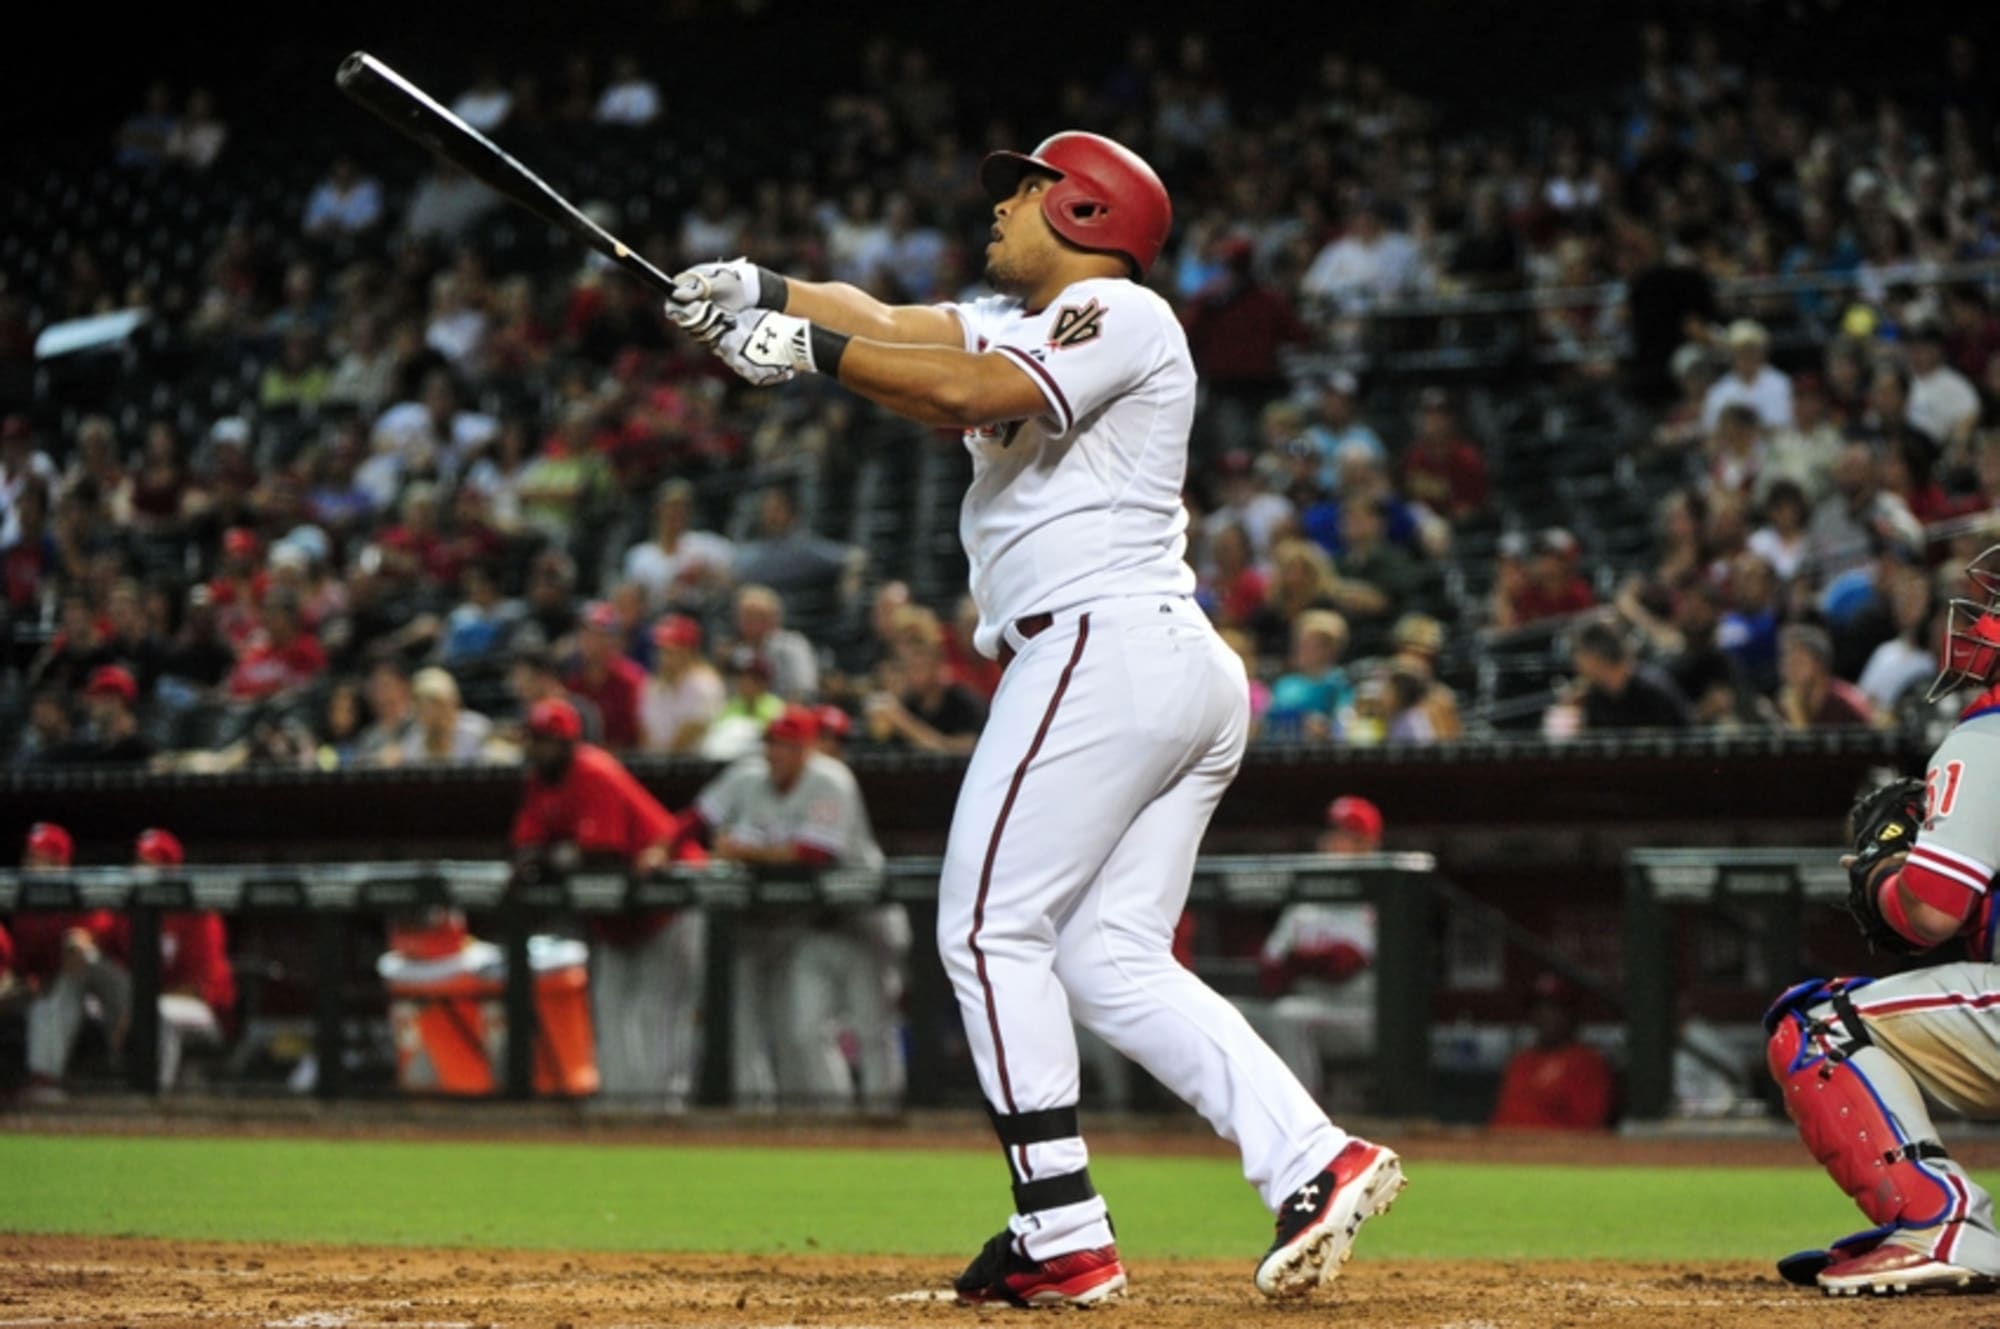 Yasmany Tomas is D'Backs' X-Factor in 2016